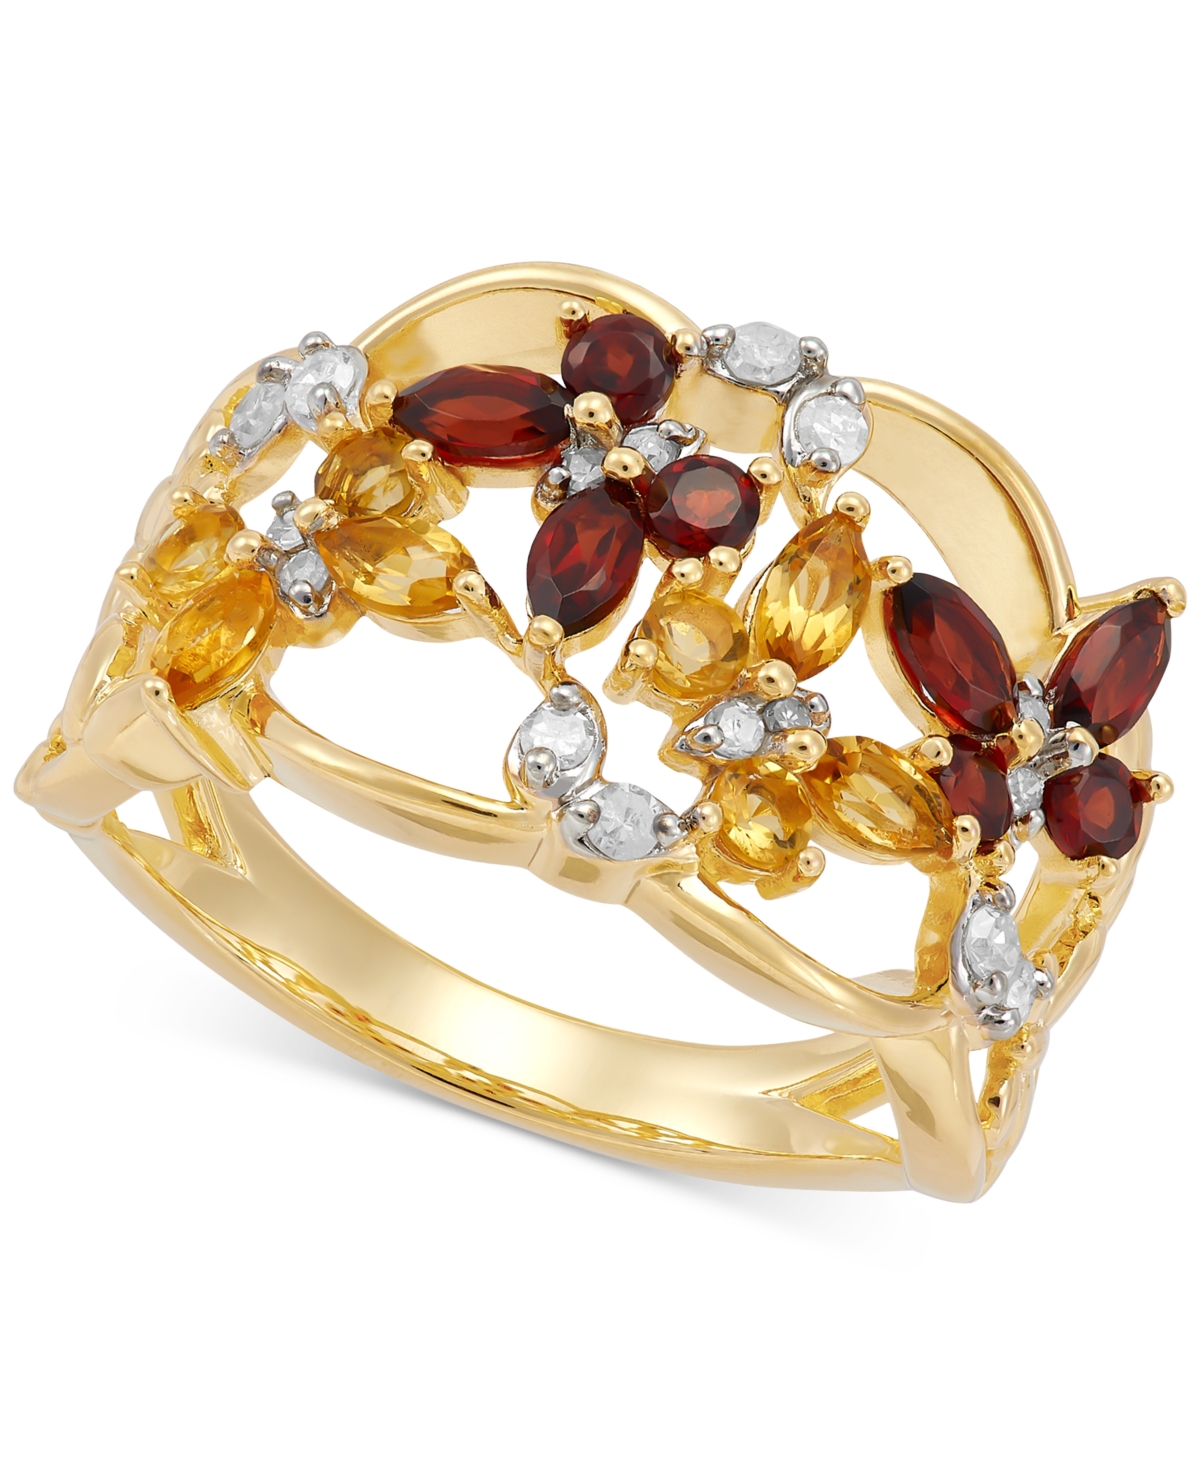 Multi-Gemstone (1-1/5 ct. t.w.) & Diamond (1/6 ct. t.w.) Butterfly Openwork Ring in 14k Gold-Plated Sterling Silver - Citrine and Garnet